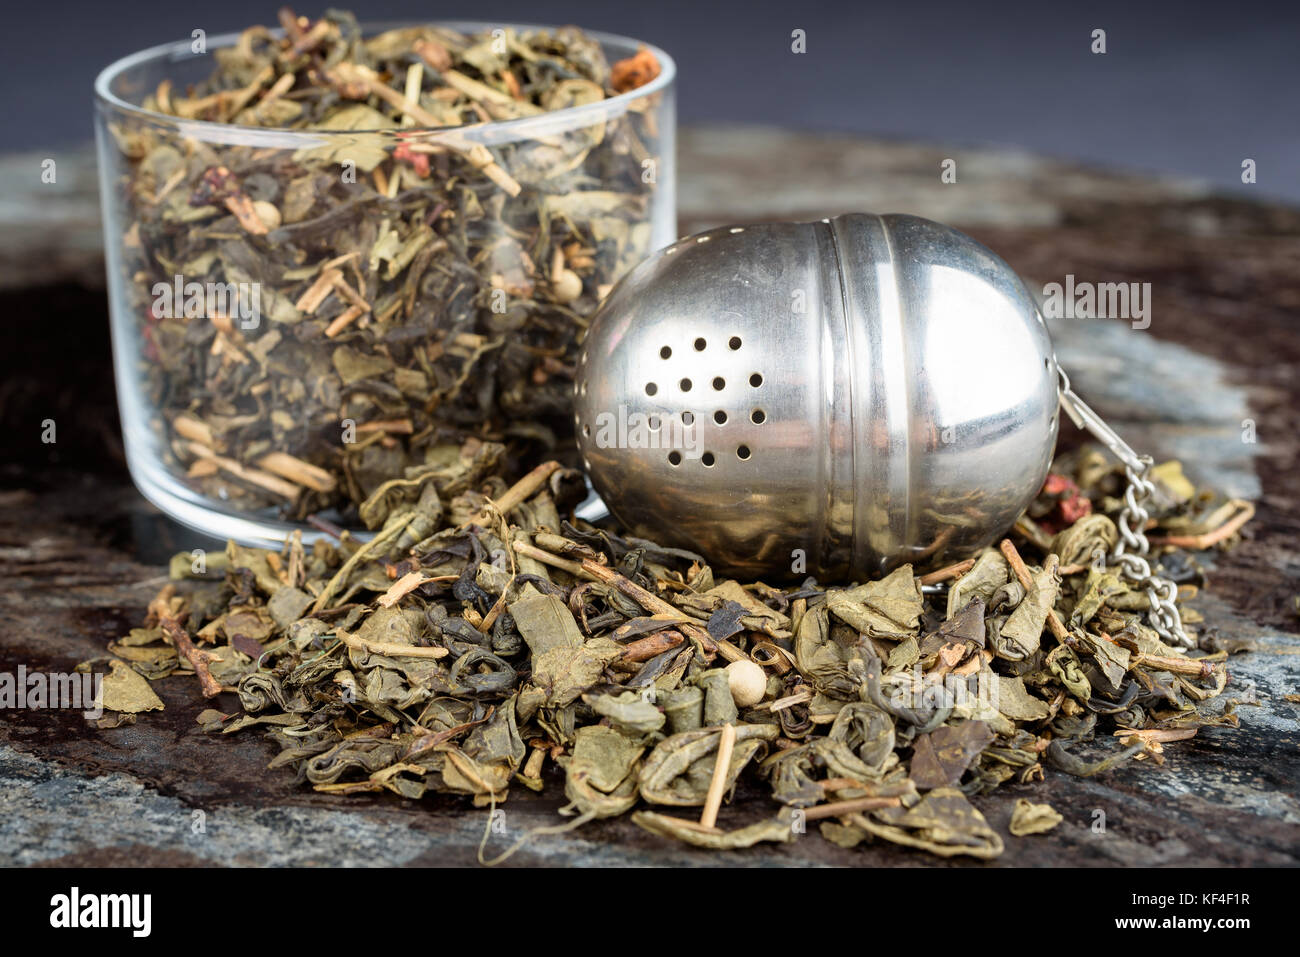 Green tea in and around glass jar with tea strainer. Stock Photo